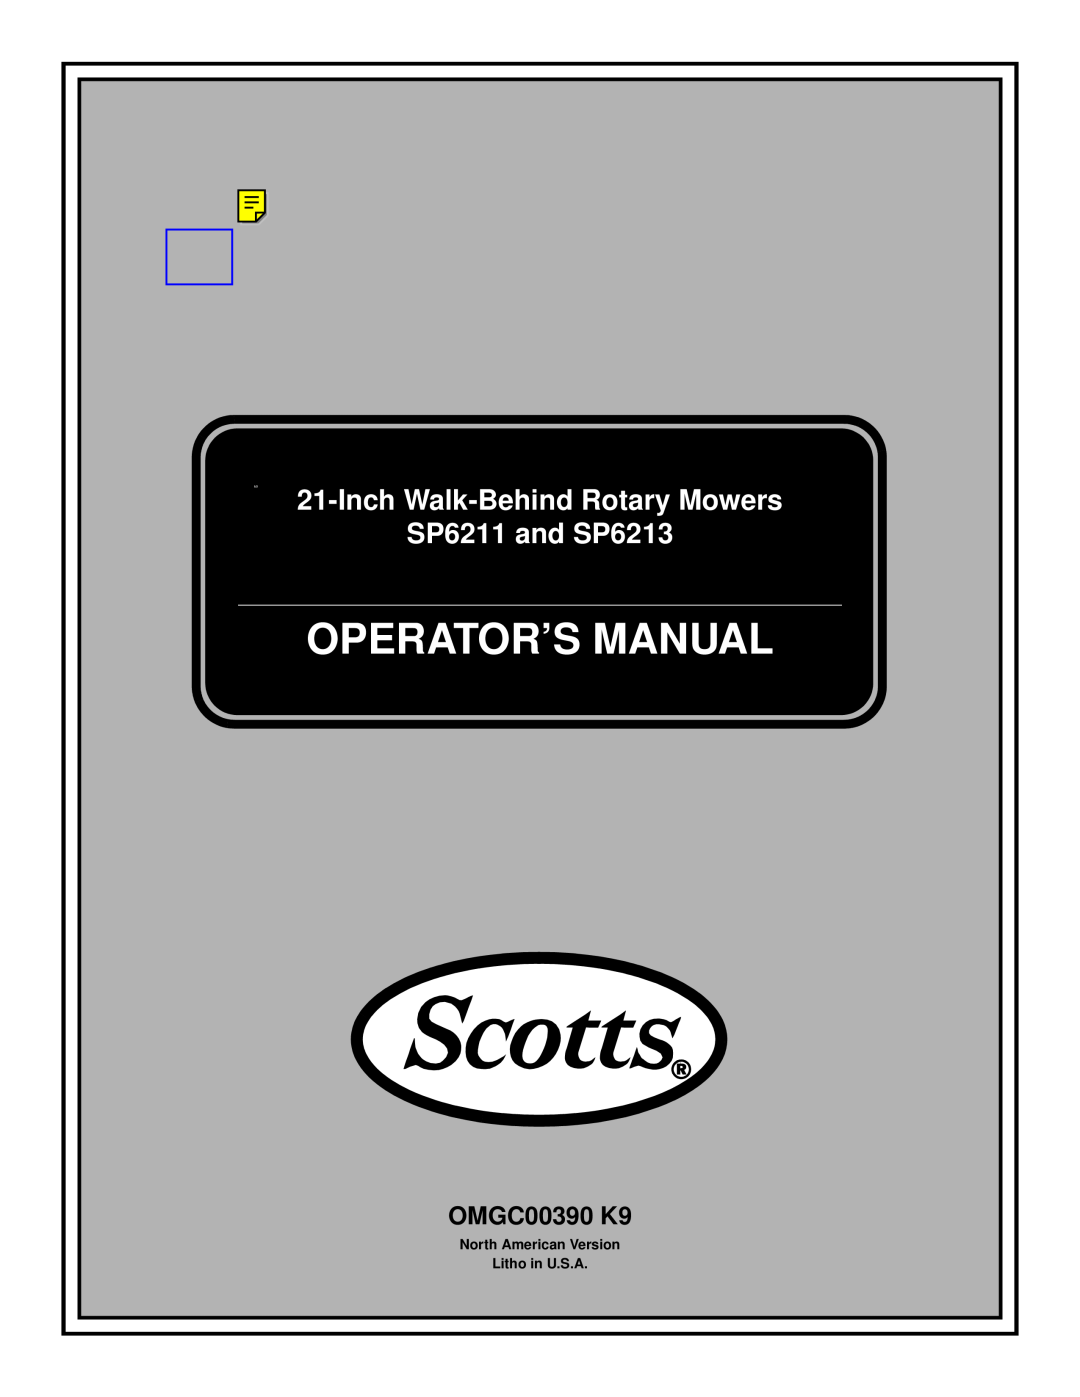 Scotts manual Operator’S Manual, Inch Walk-Behind Rotary Mowers, SP6211 and SP6213, OMGC00390 K9, Litho in U.S.A 